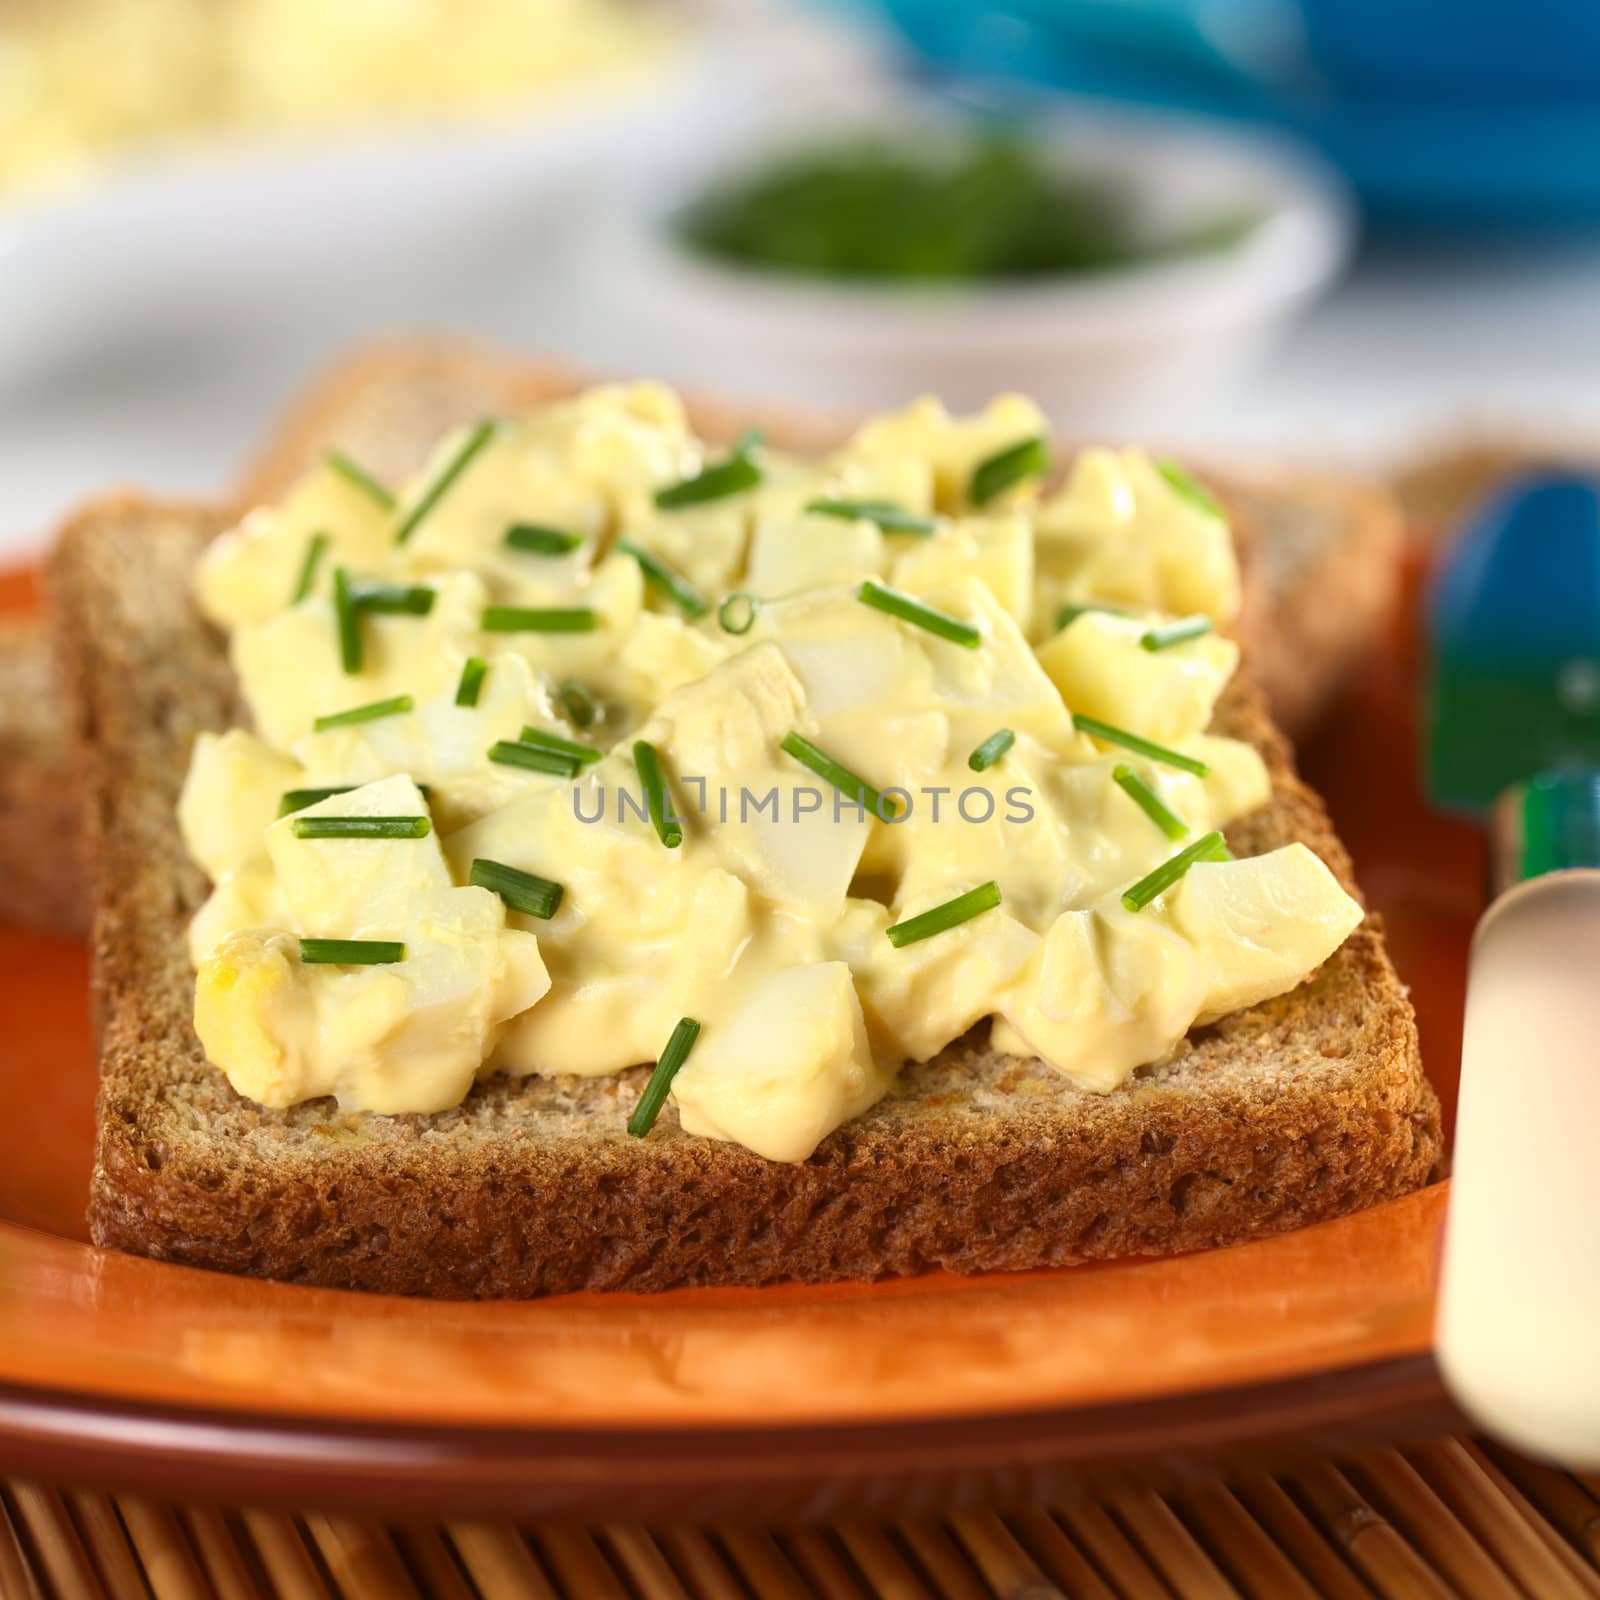 Egg Salad with Chives on Toast Bread by ildi